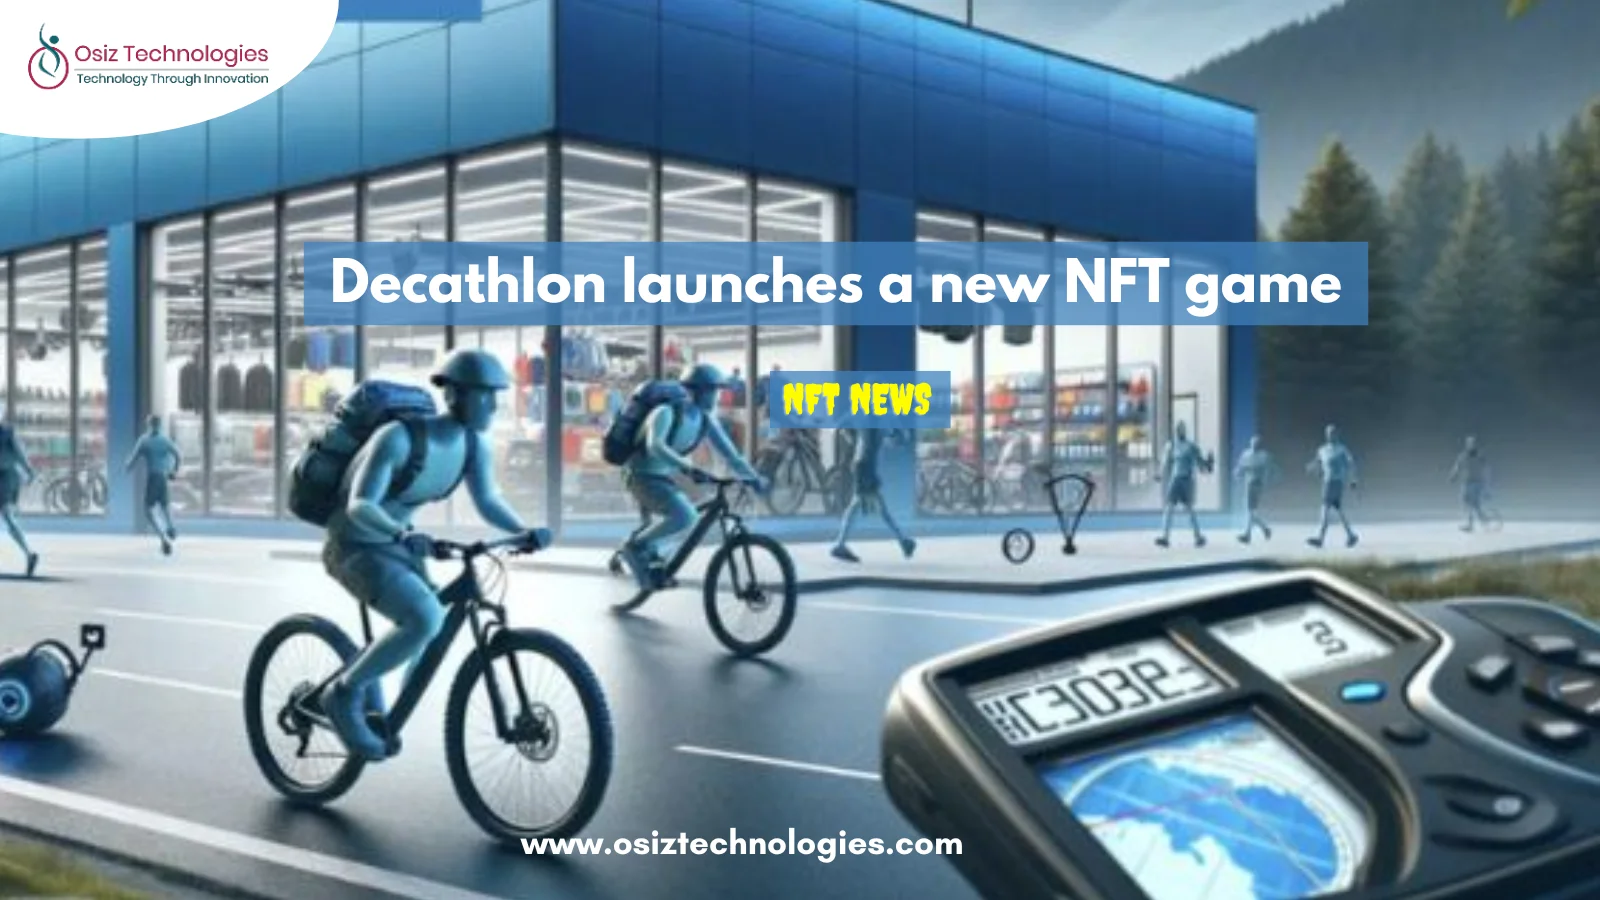 Decathlon has launched an exciting new NFT game